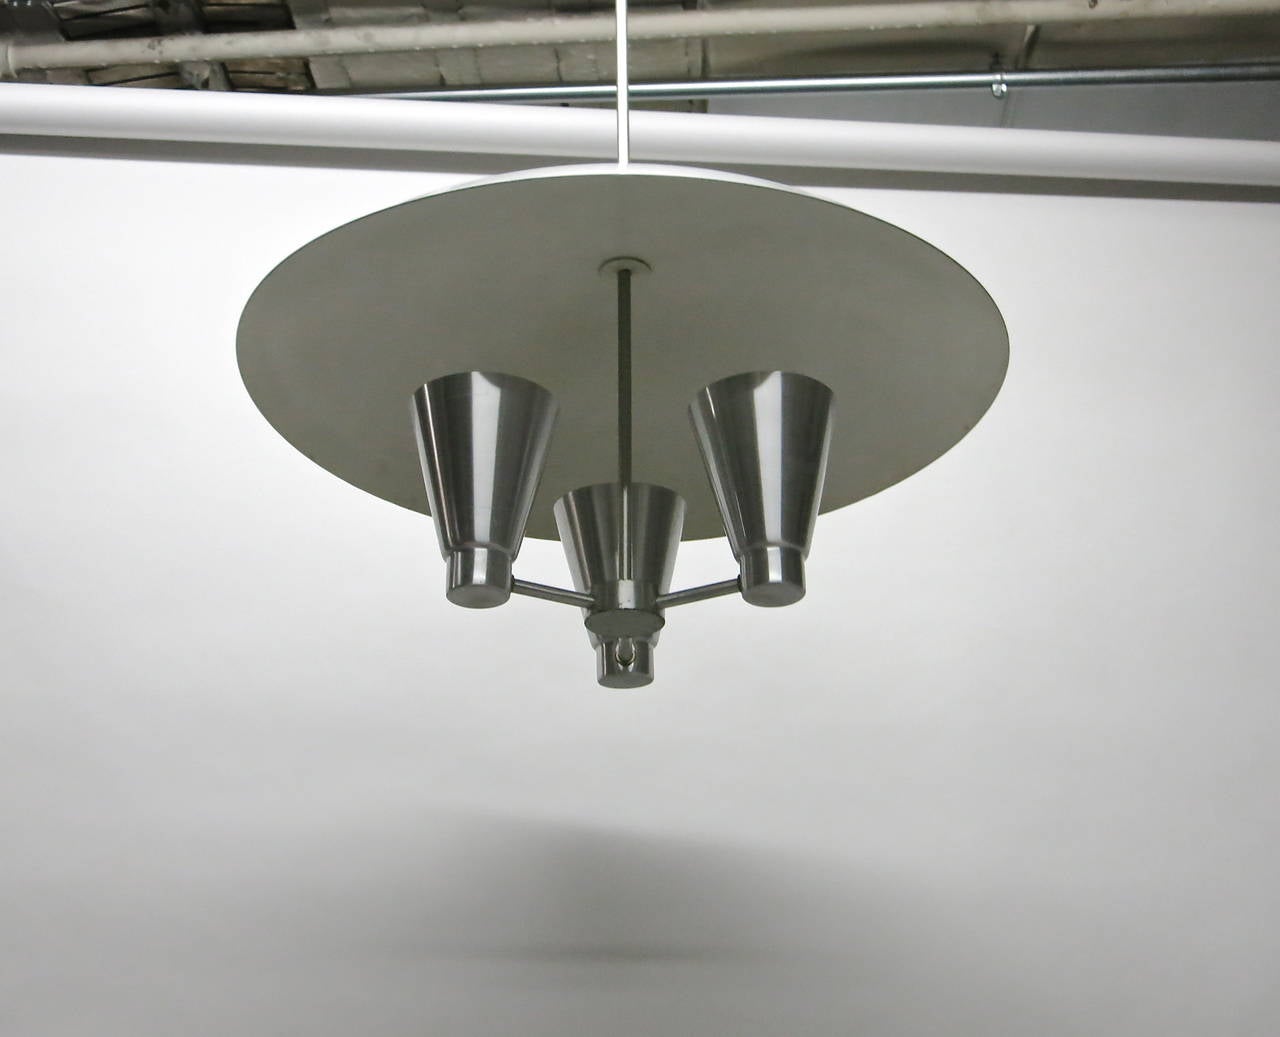 Ceiling light with three light diffusers and arched shade all in spun aluminum, designed by Edward Wormley.